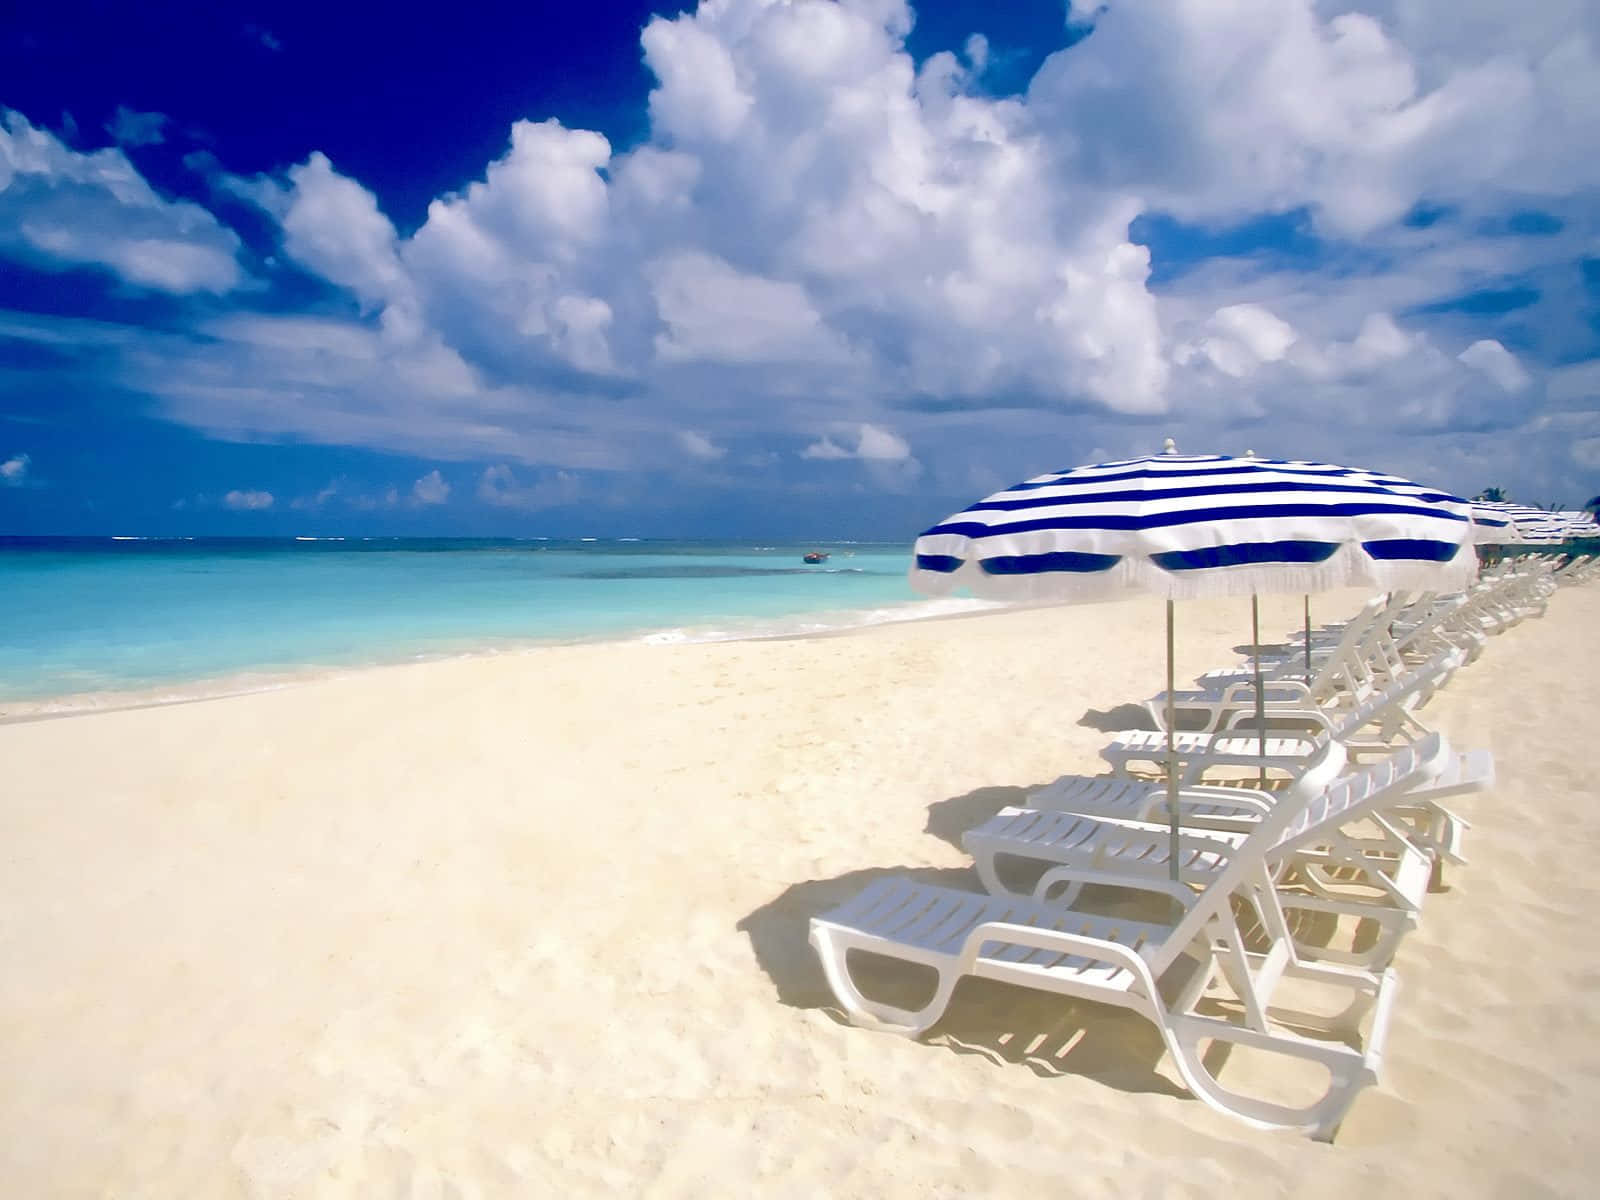 Take In The Beauty Of A Tranquil Pretty Beach Wallpaper